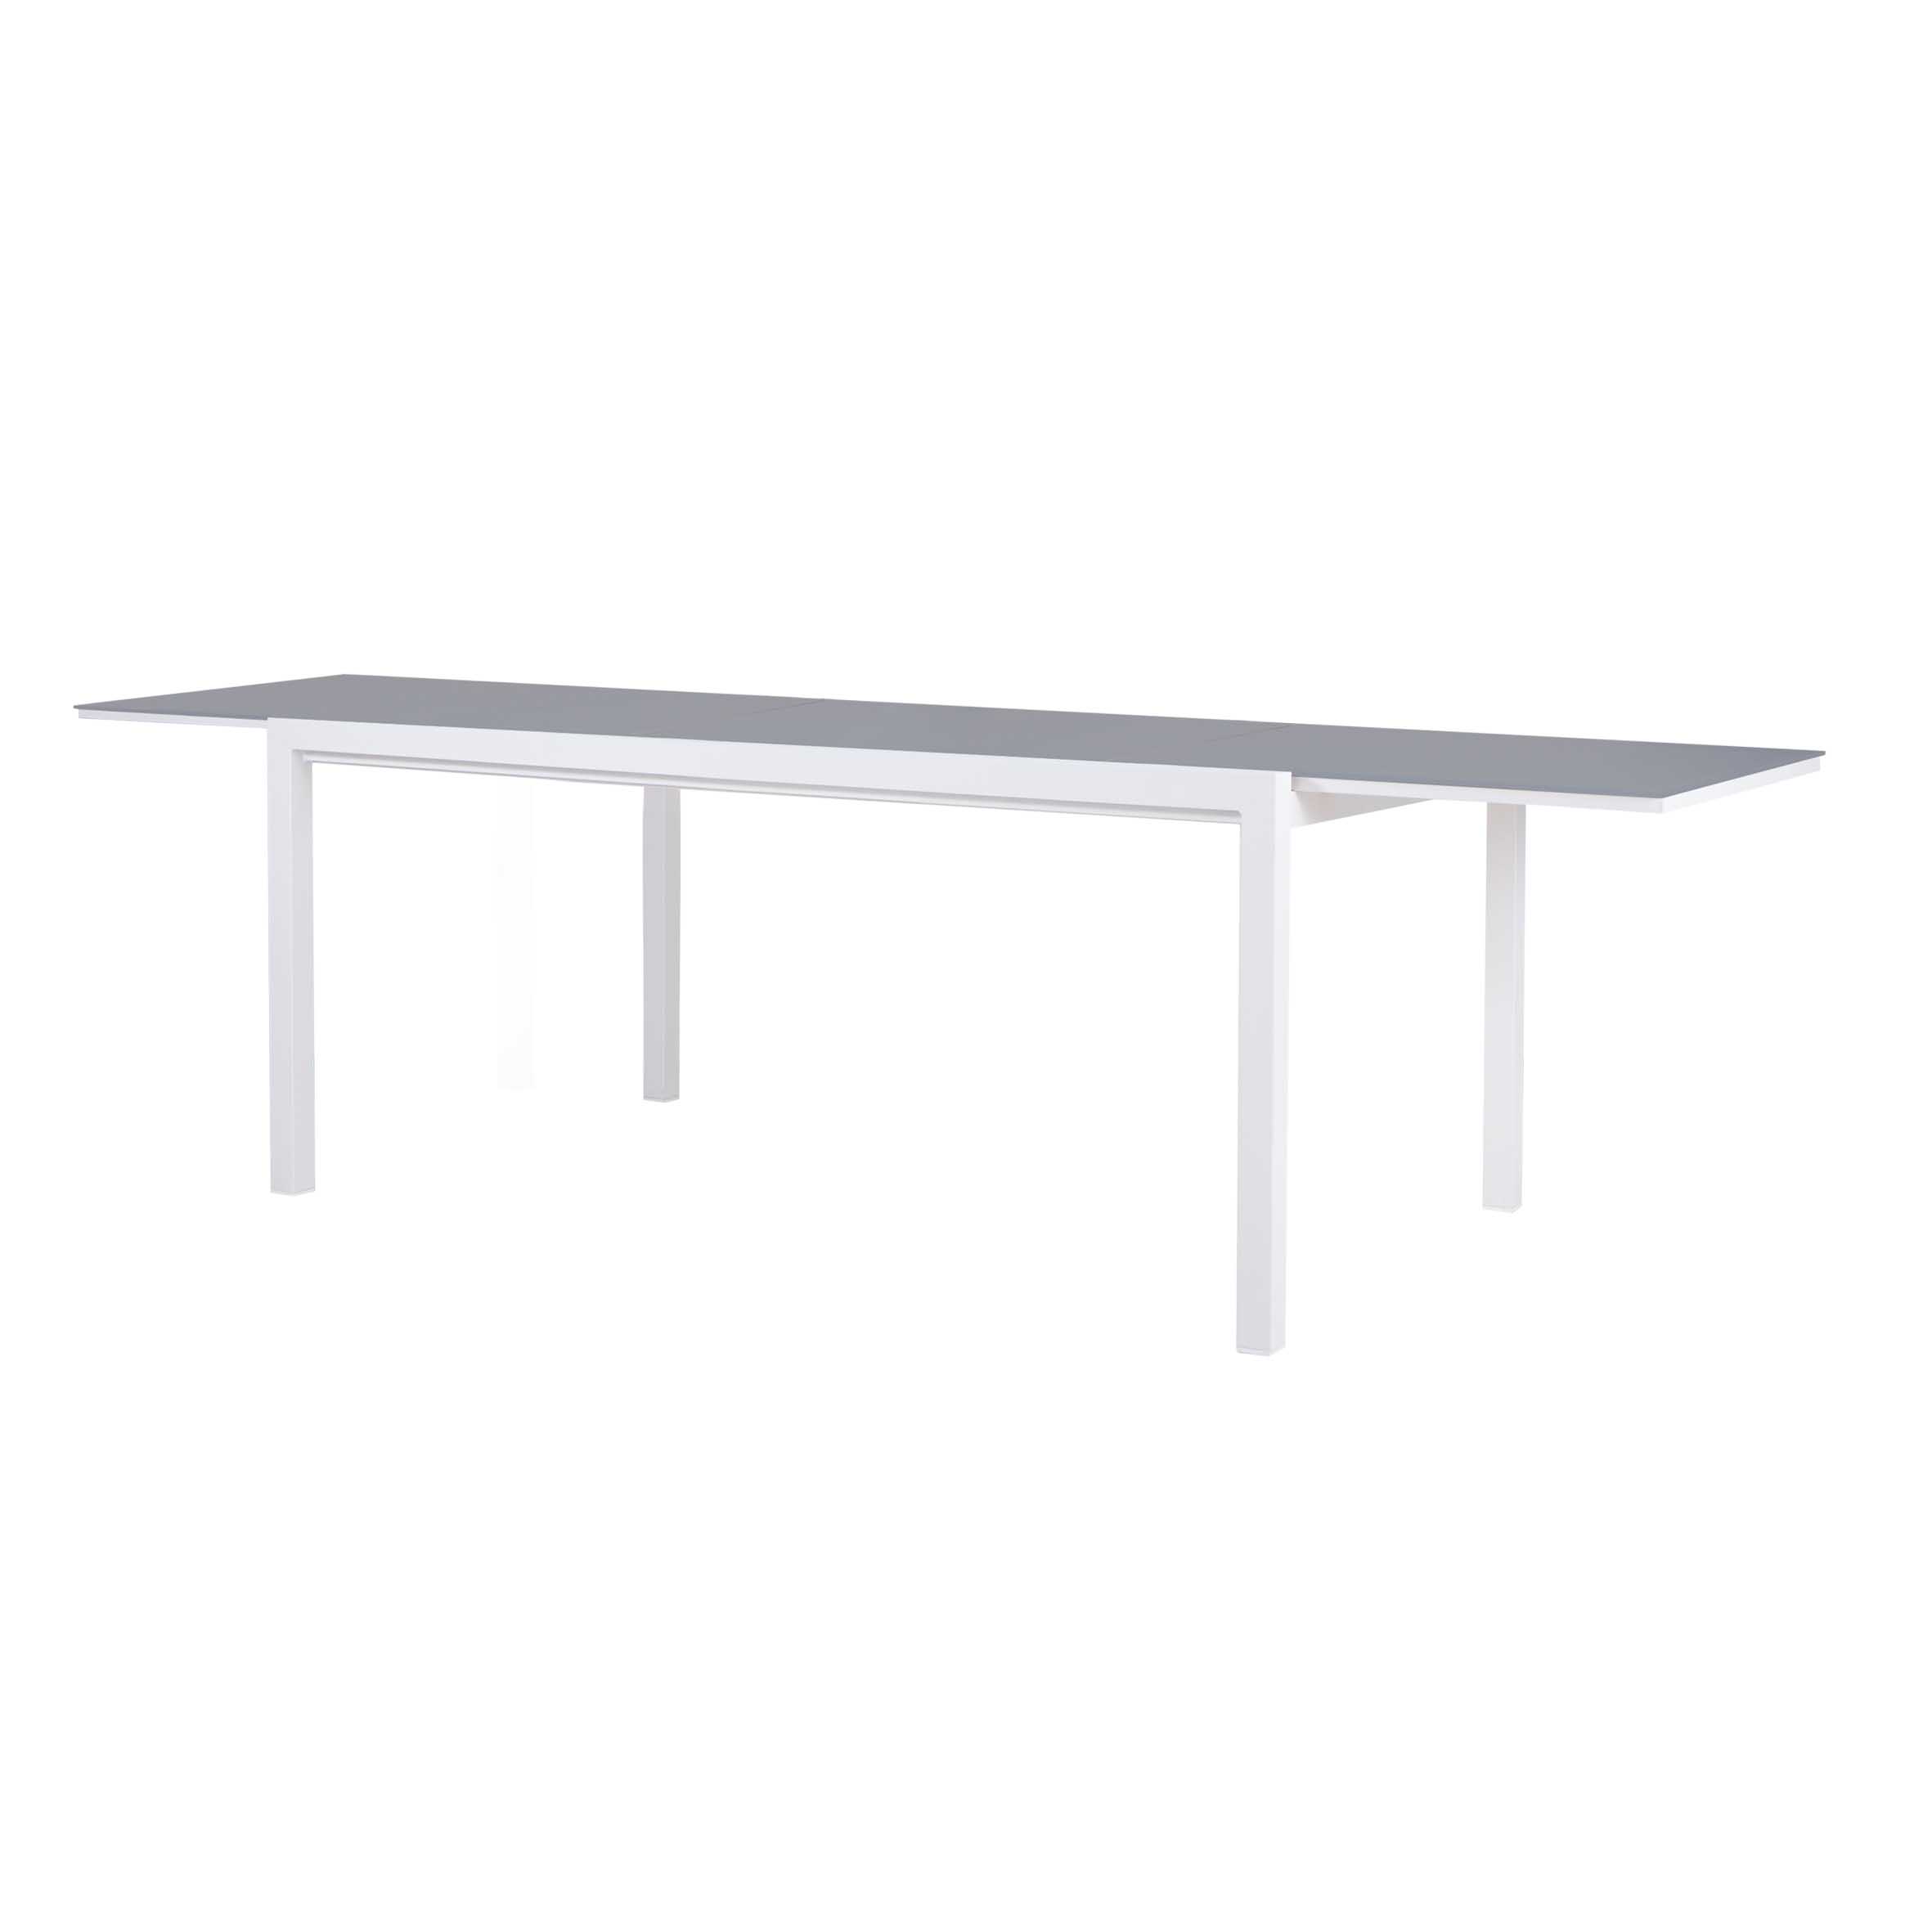 Kotka extension table S14